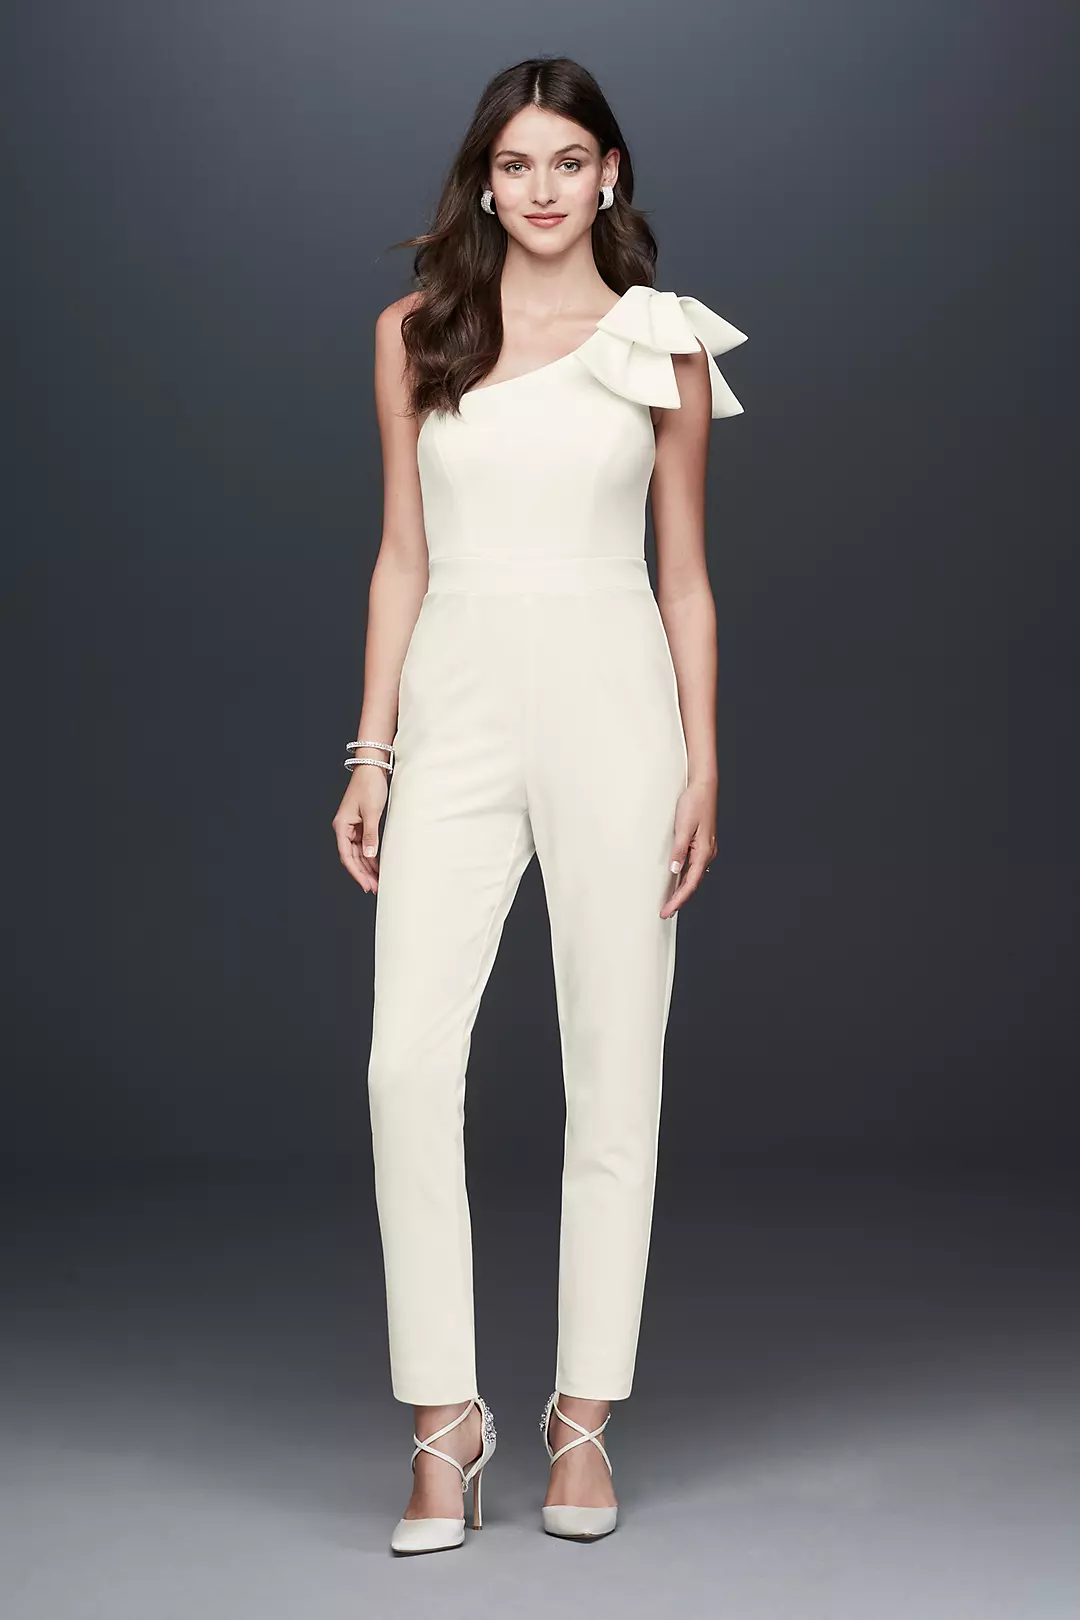 Crepe One Shoulder Tapered Jumpsuit with Bow Image 1